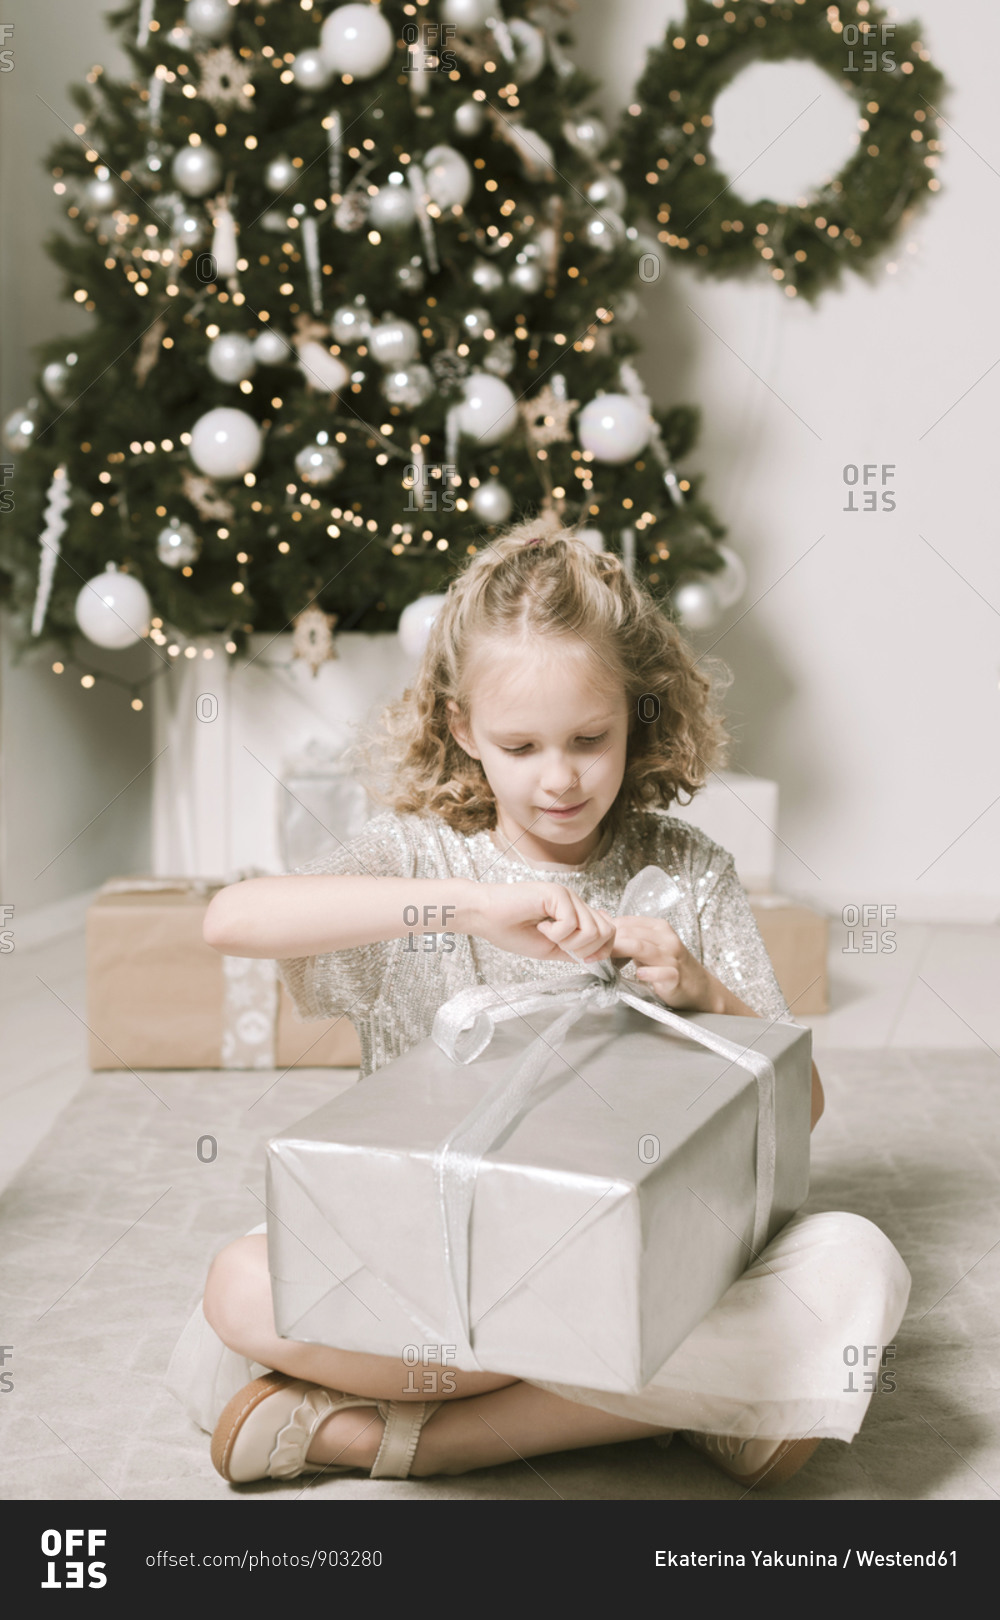 Portrait of blond little girl sitting in front of Christmas tree opening Christmas present